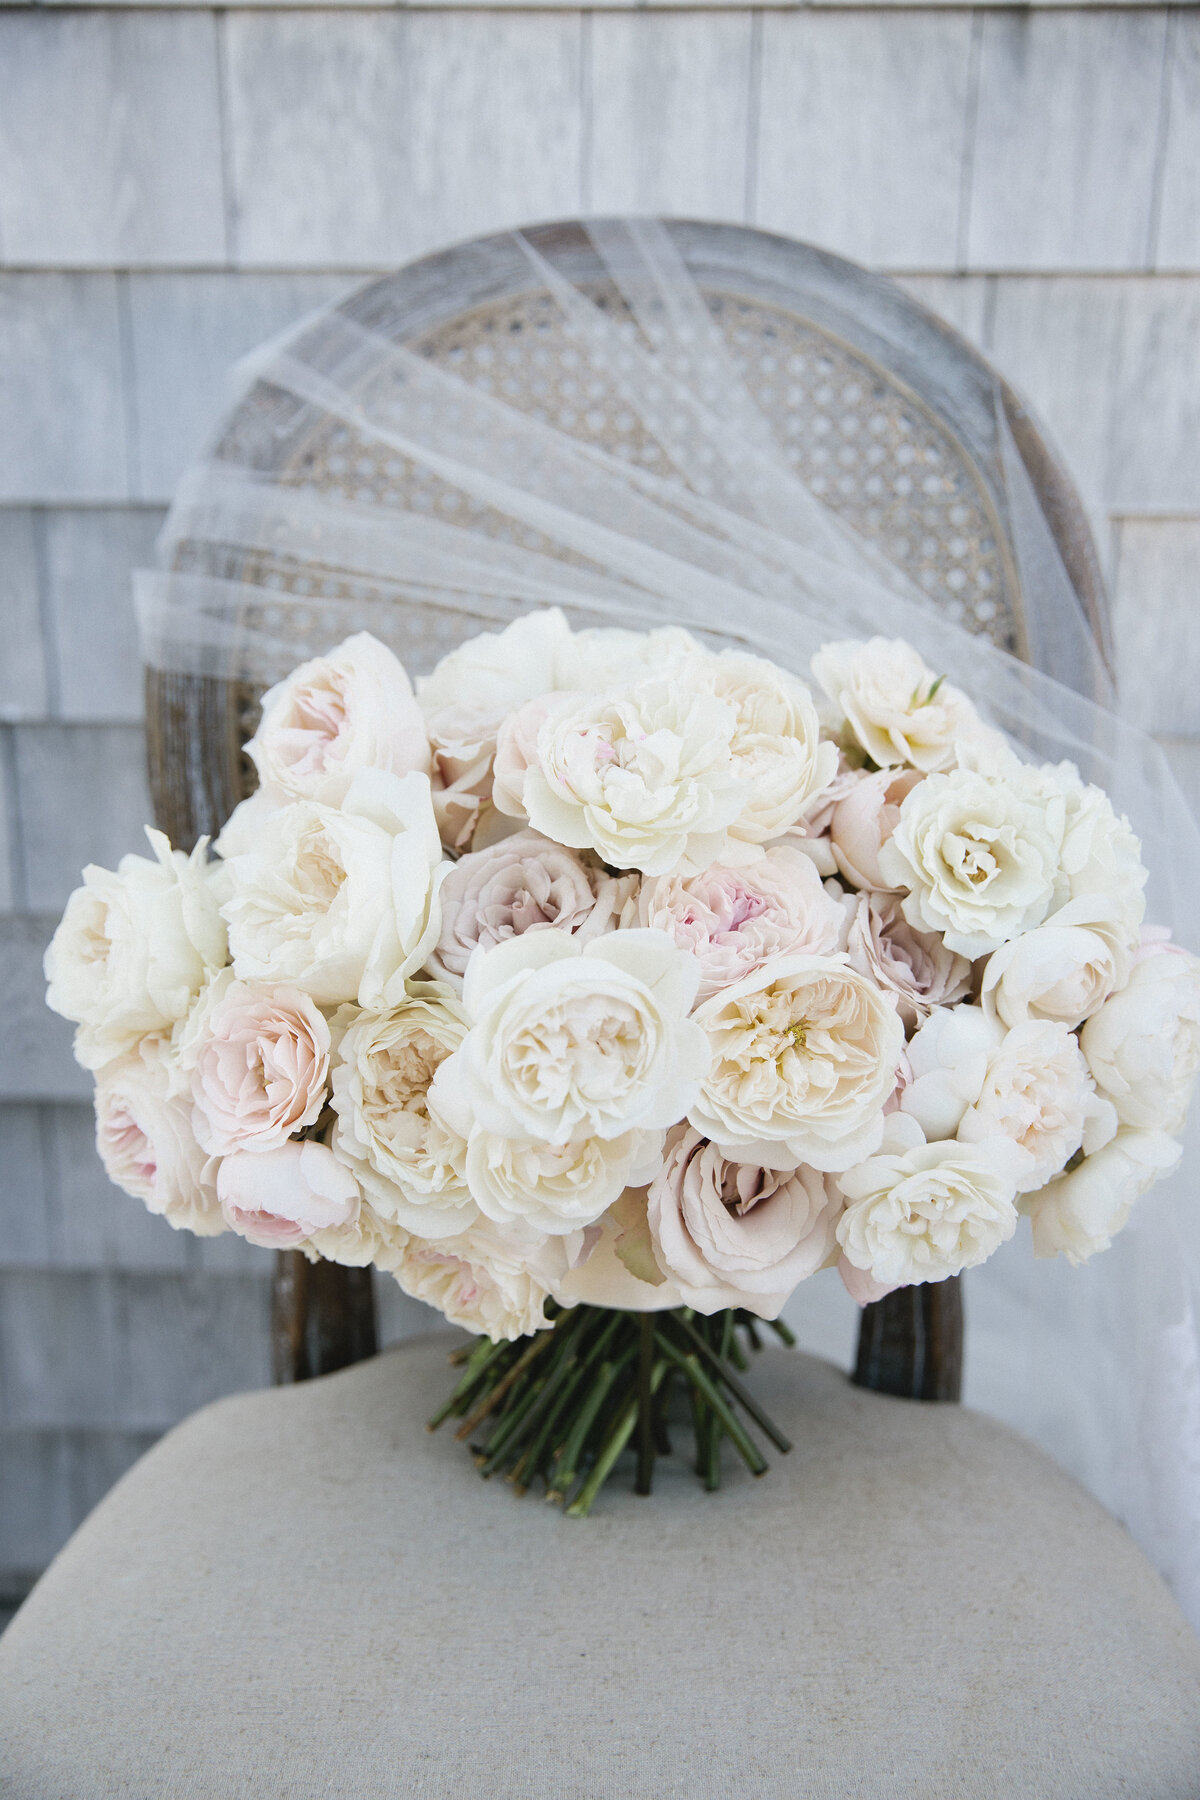 Garden rose bouquet for Whitney Bischoff of the Bachelor